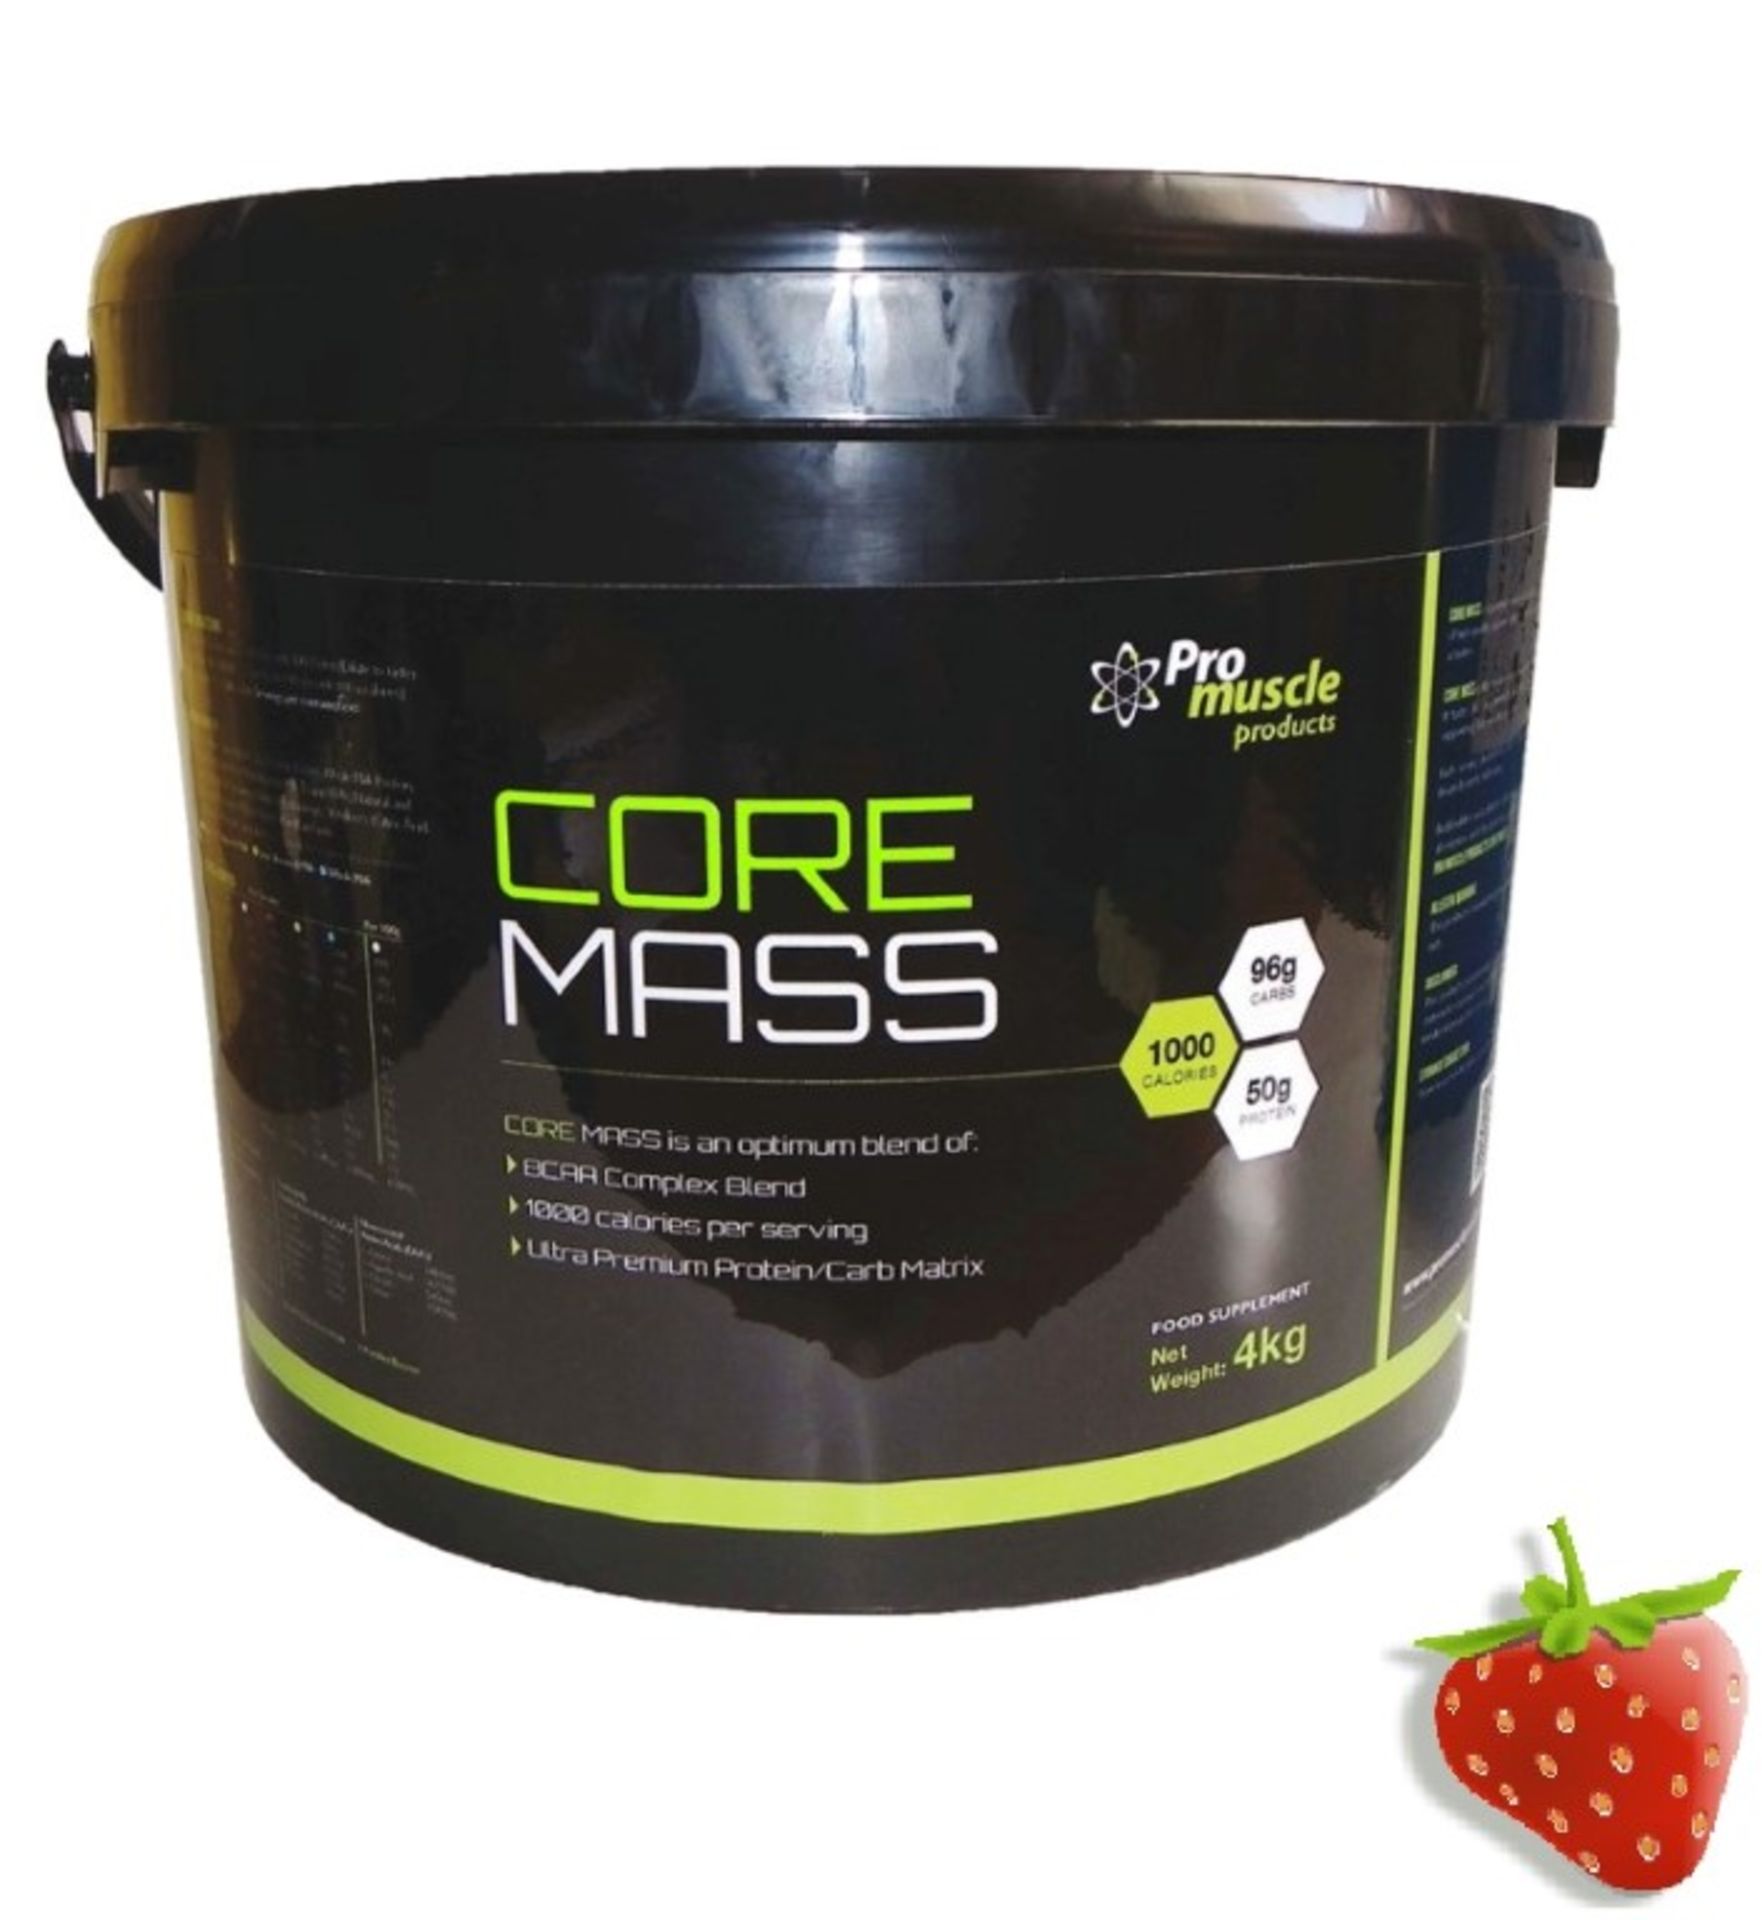 1 x Pro Muscle CORE MASS GAINER Food Supplement (4KG) - Flavour: Strawberry - New Sealed Stock -